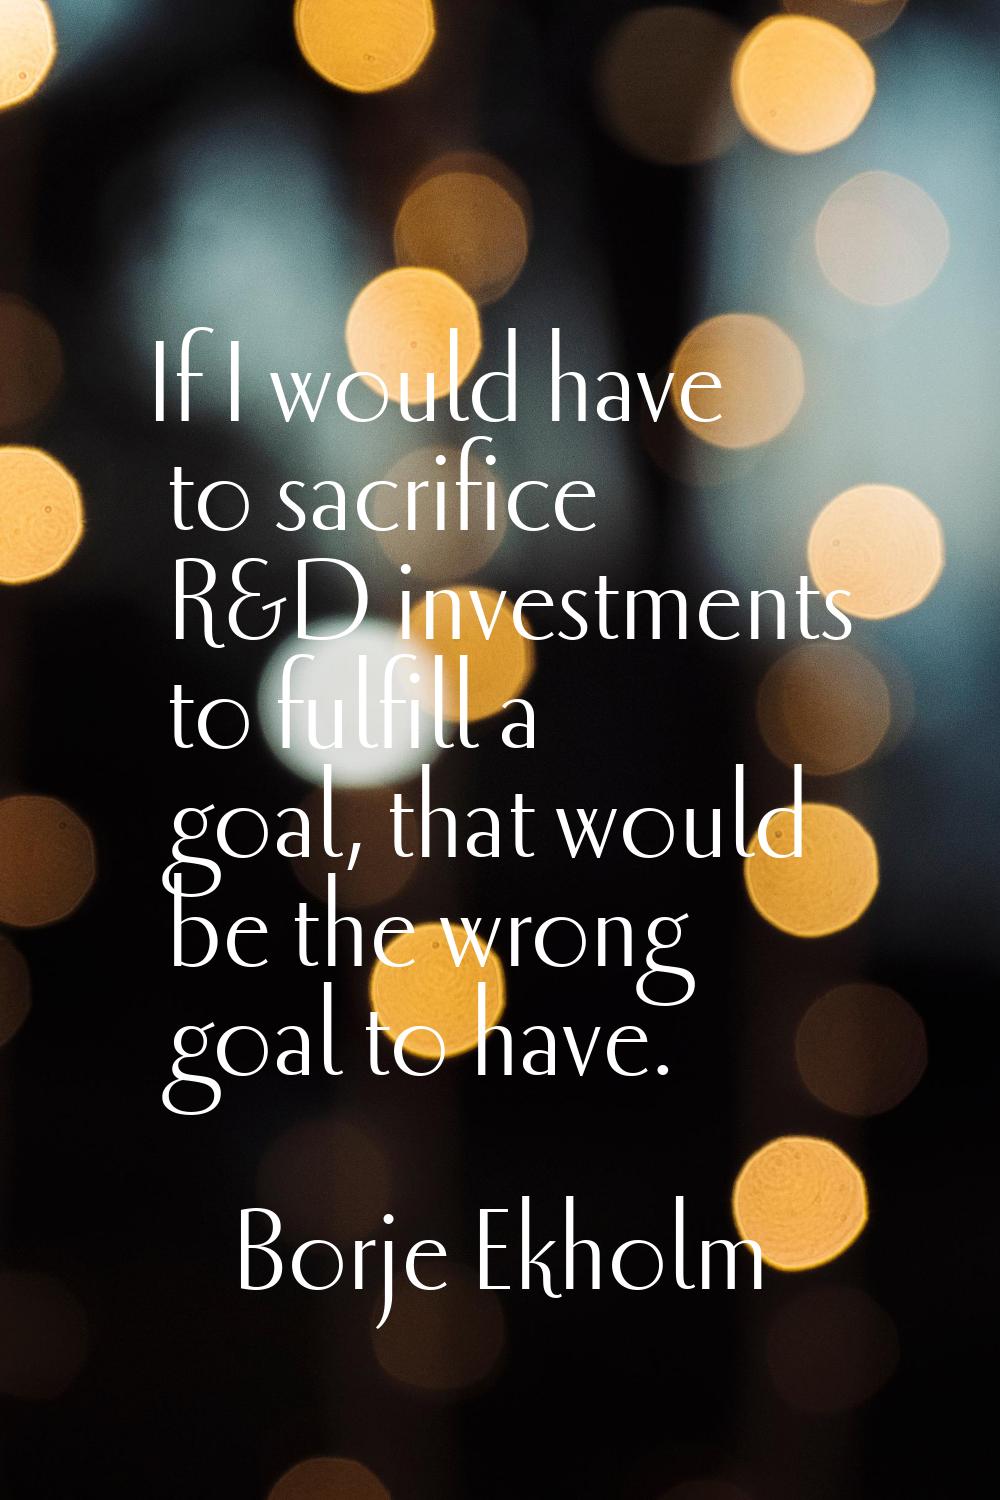 If I would have to sacrifice R&D investments to fulfill a goal, that would be the wrong goal to hav